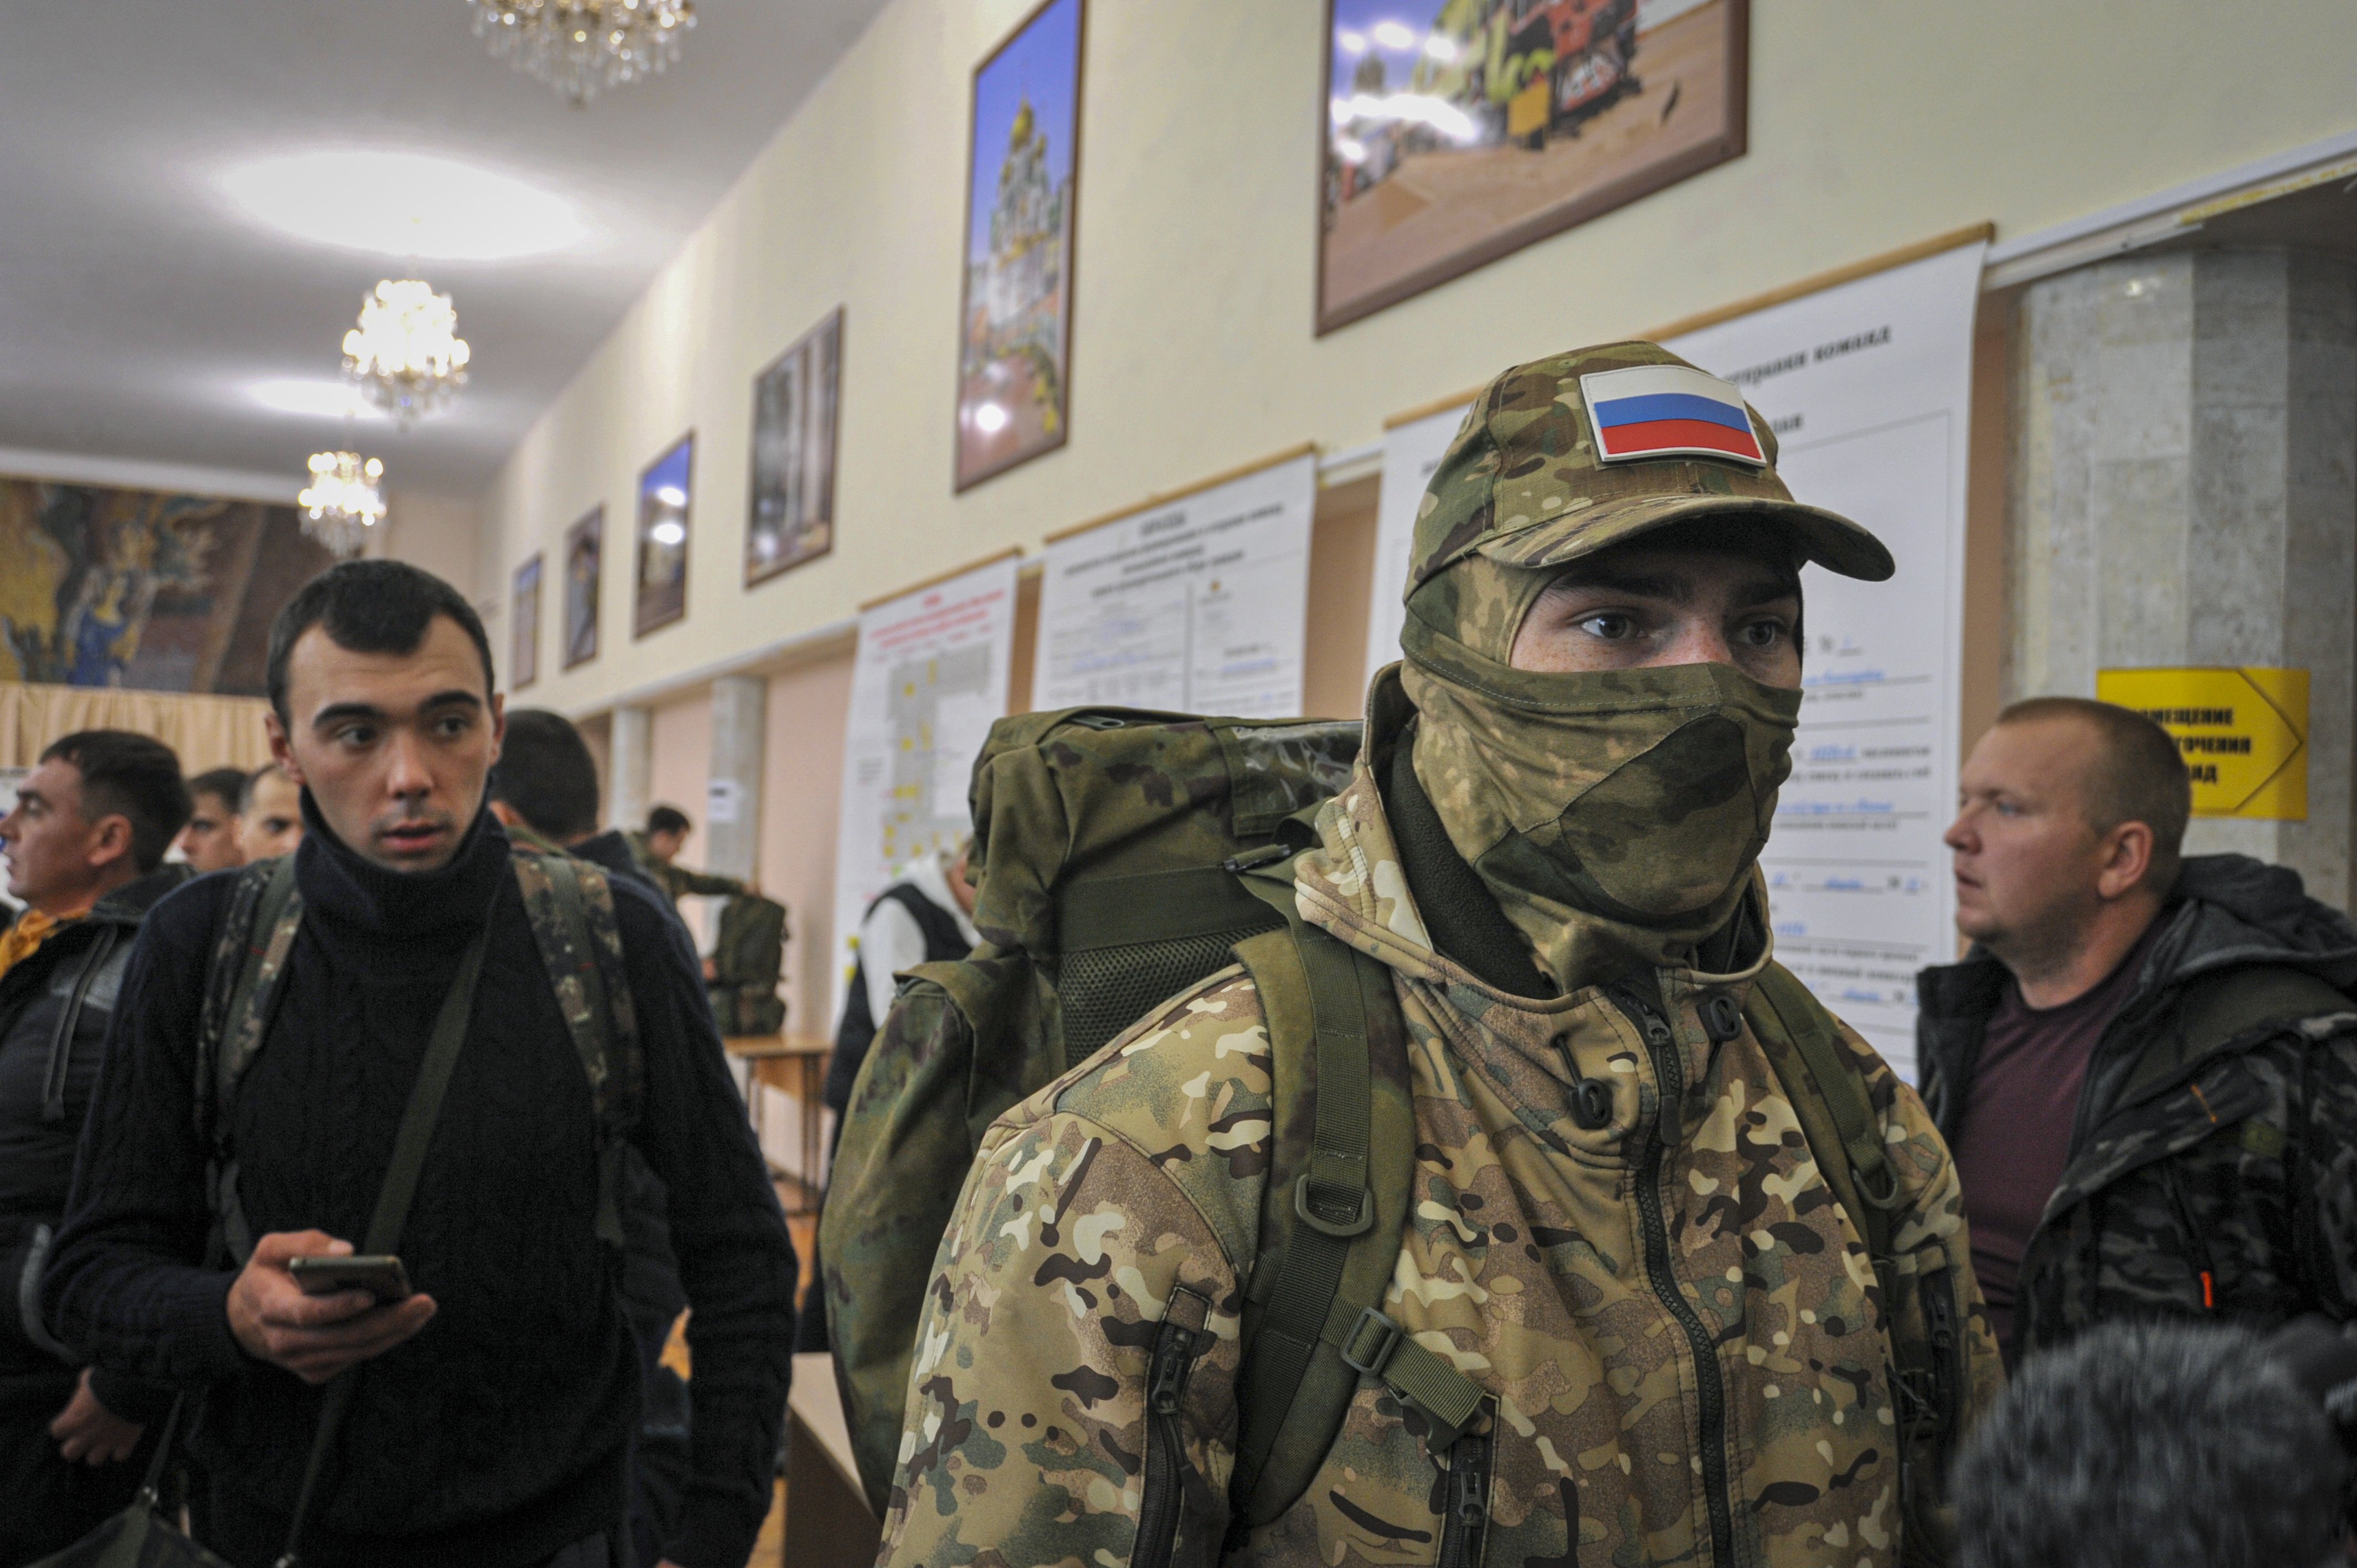 200 Russian deserters ask for asylum in Spain to avoid being sent to Ukraine war